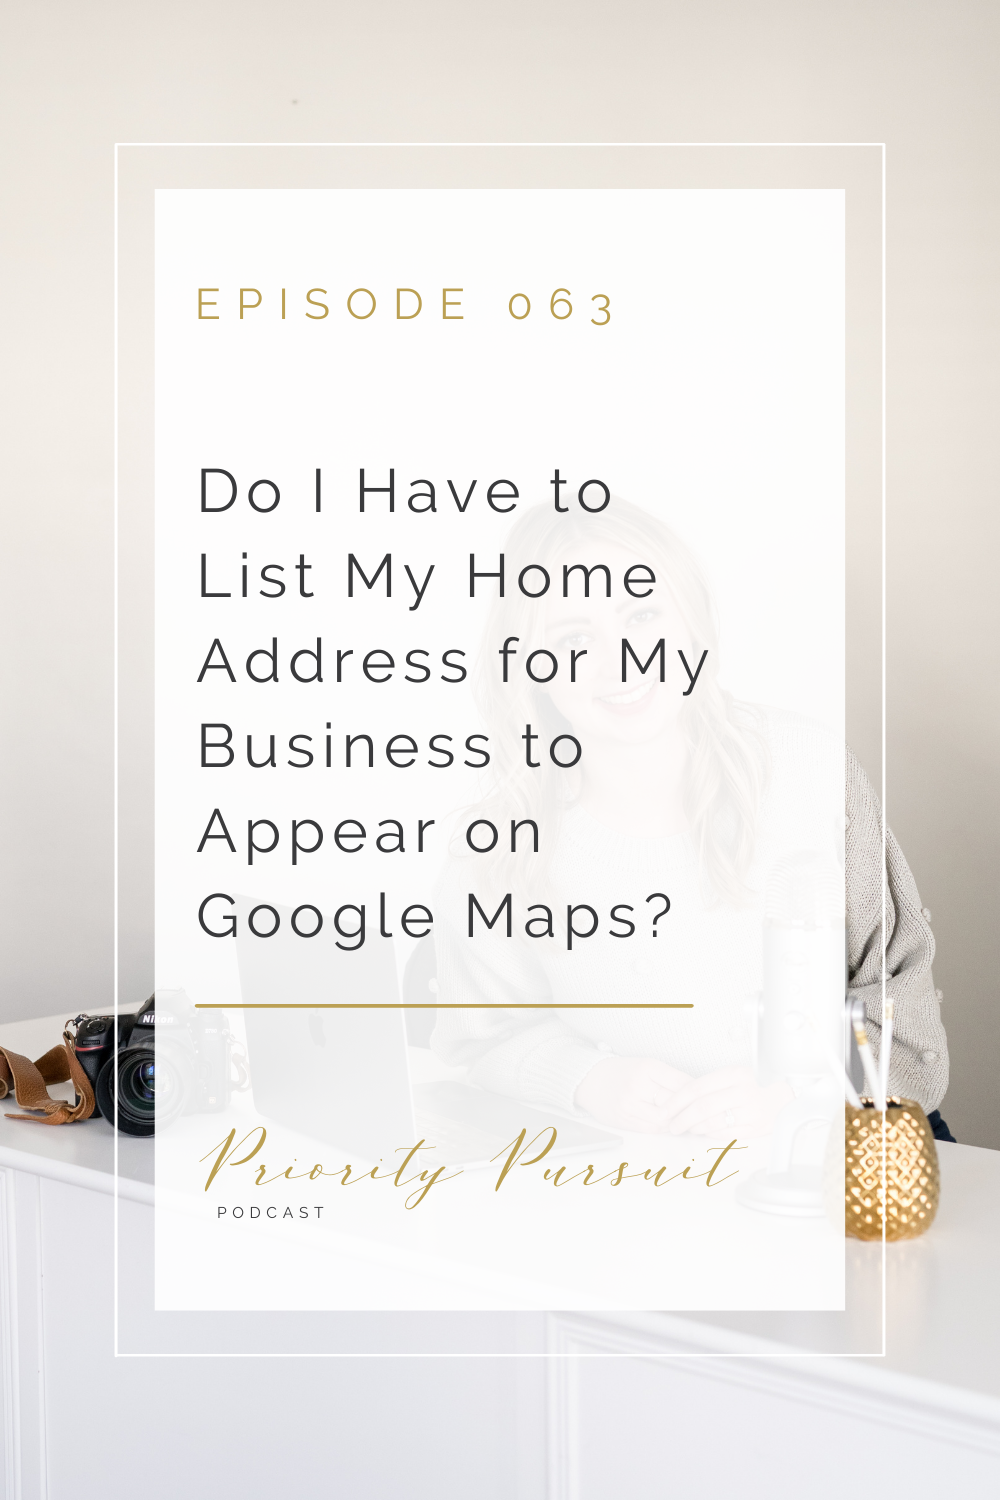 Victoria Rayburn answers the common question “Do I have to list my home address for my business to appear in Google Maps?” in this episode of “Priority Pursuit.” 